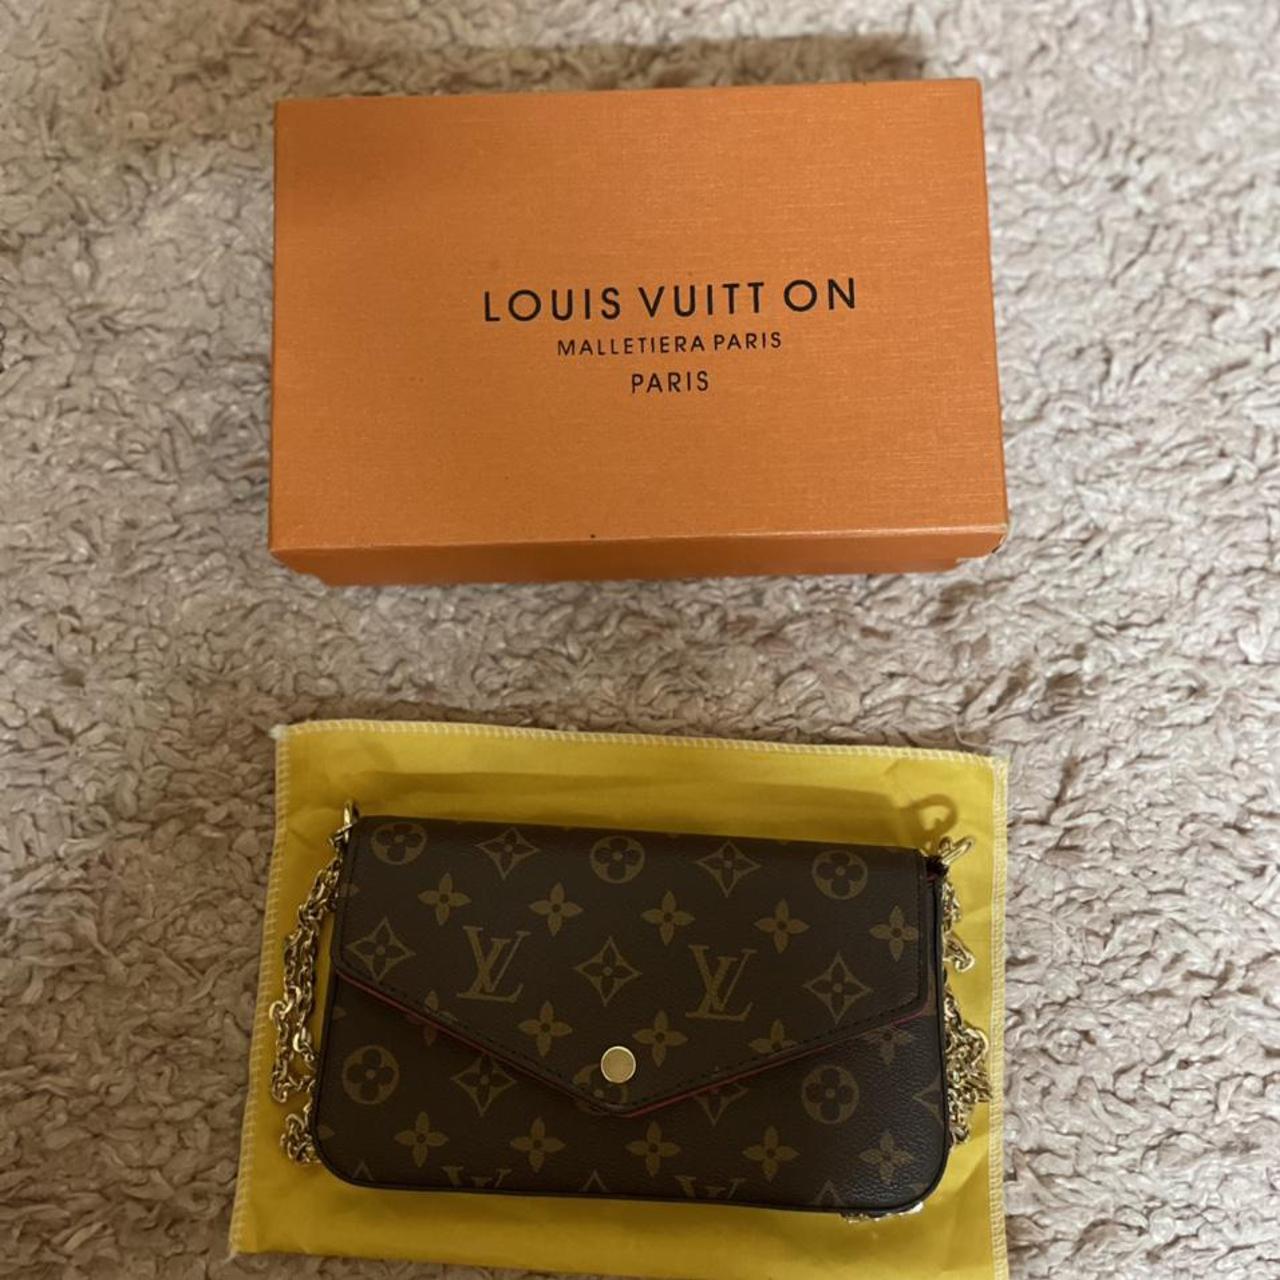 Small Louis Vuitton box (only box included)